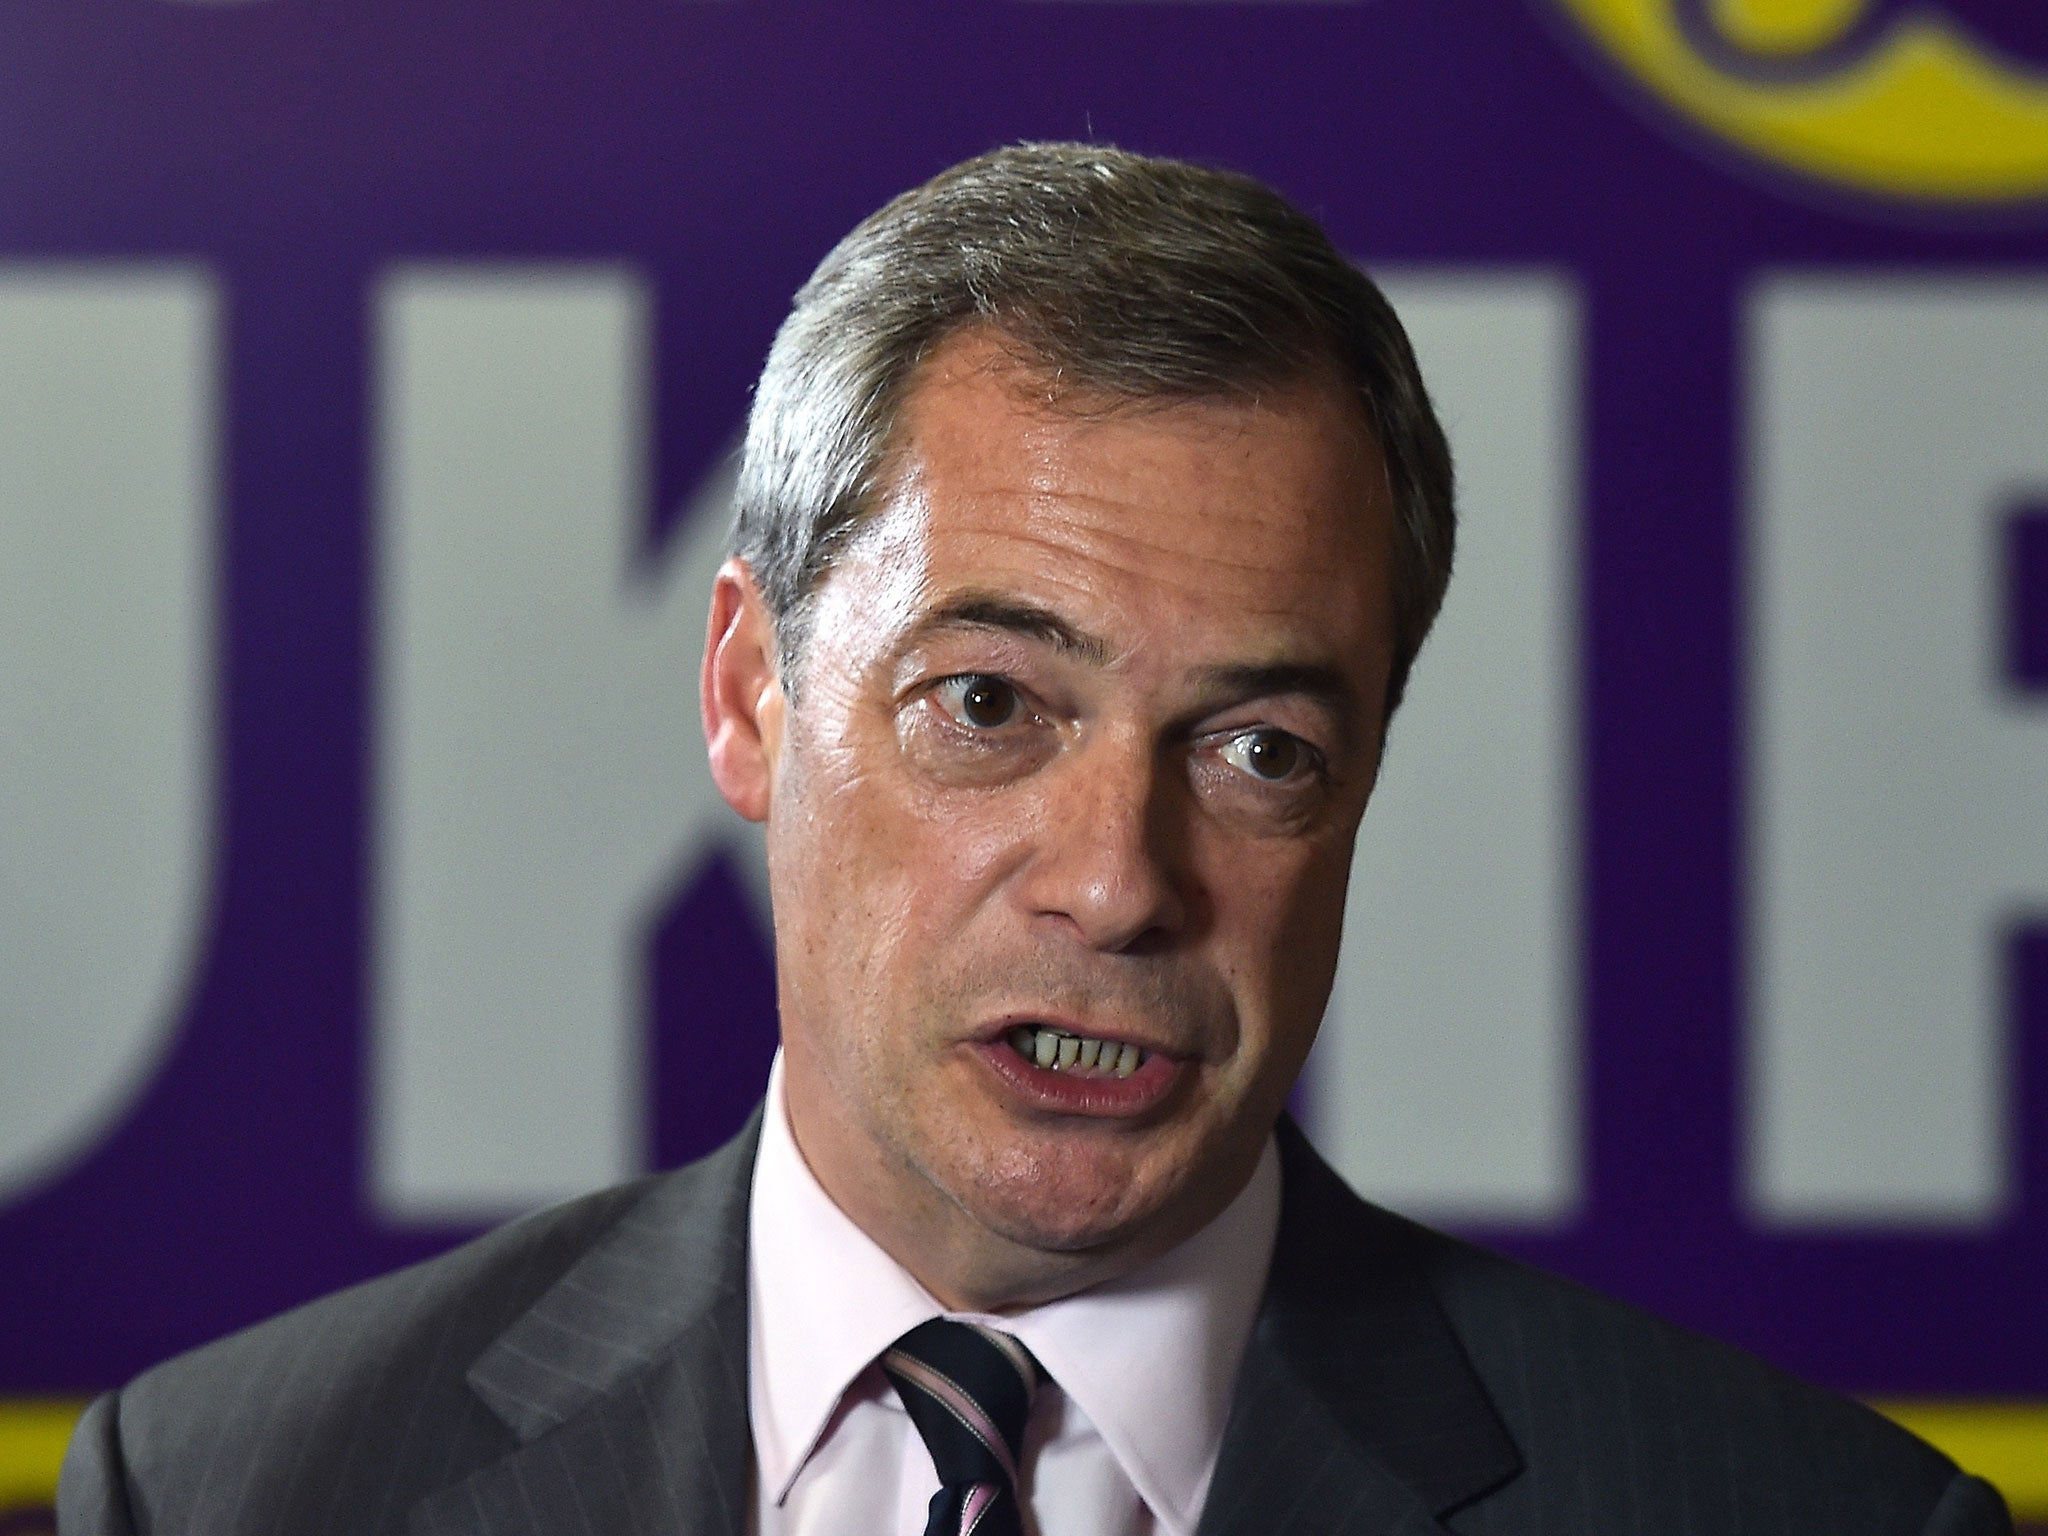 Nigel Farage is expected to commit his party to a series of populist policies